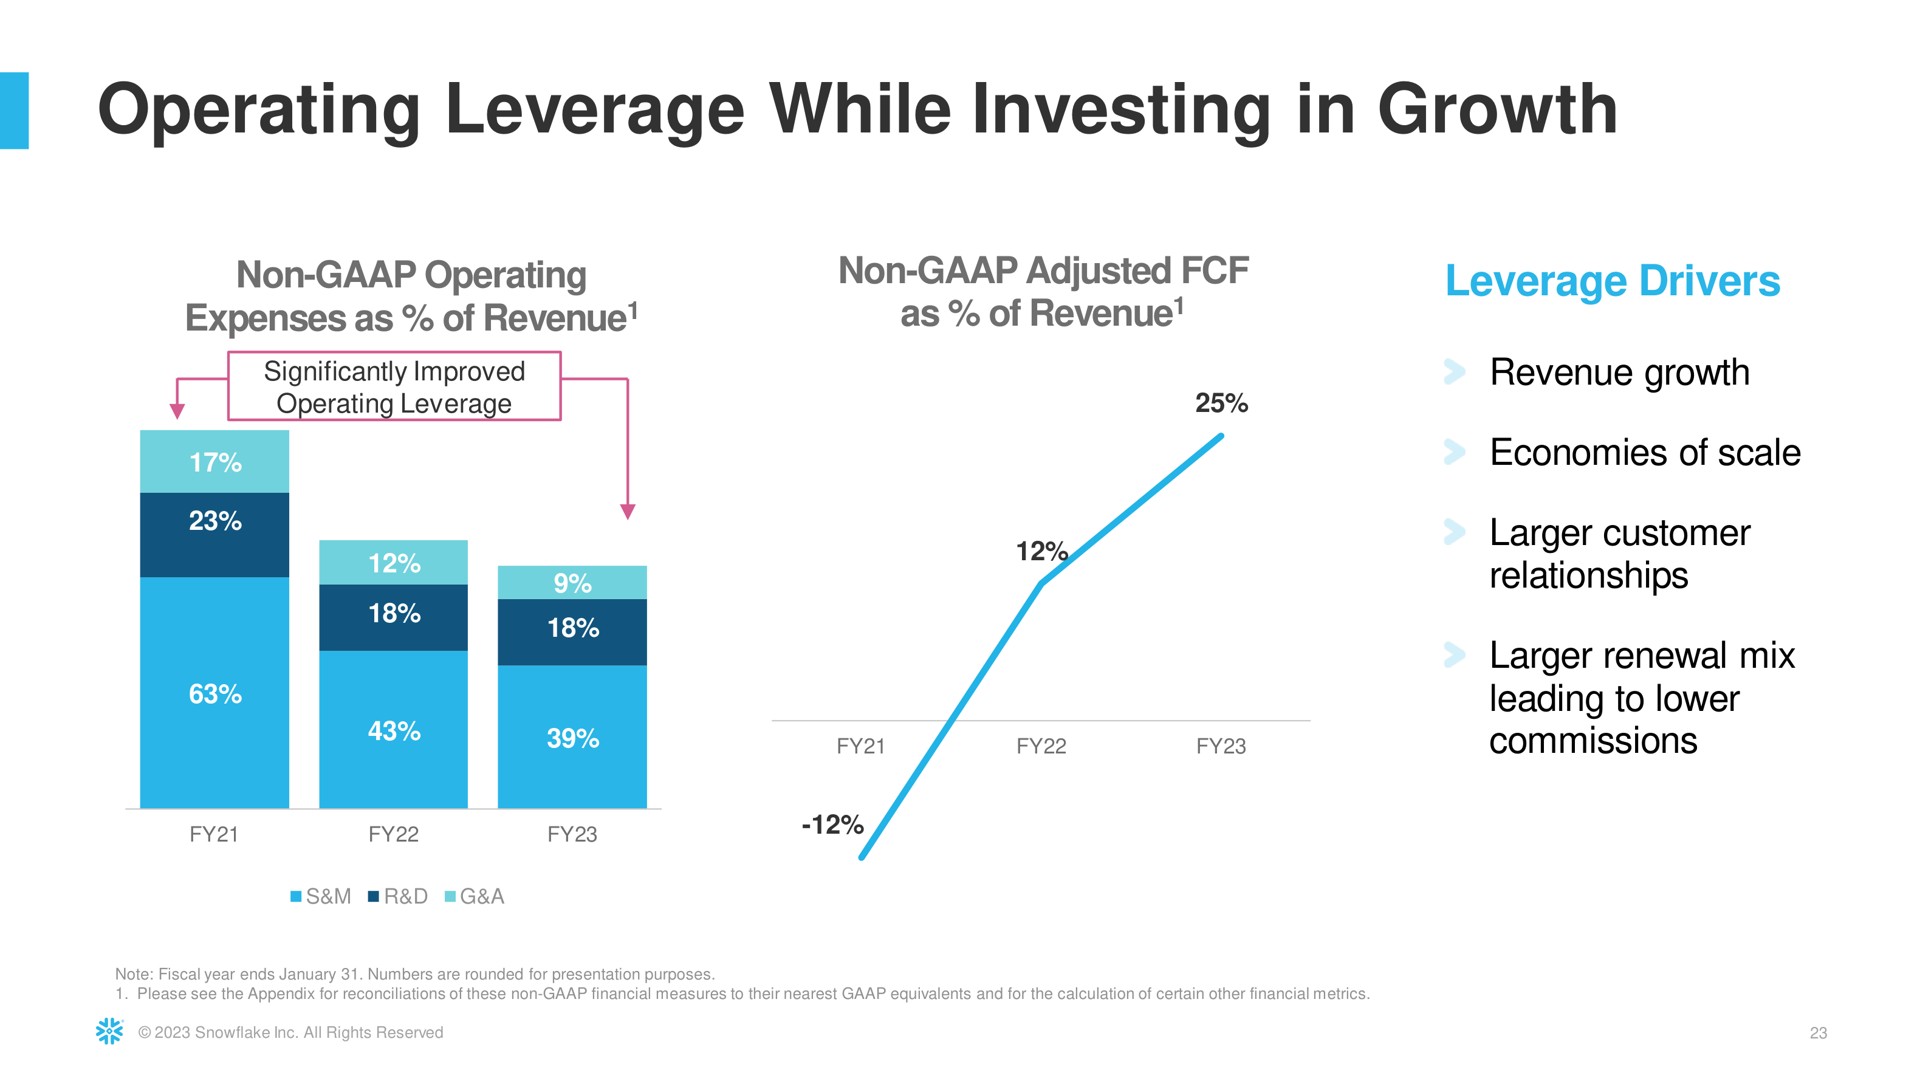 operating leverage while investing in growth | Snowflake